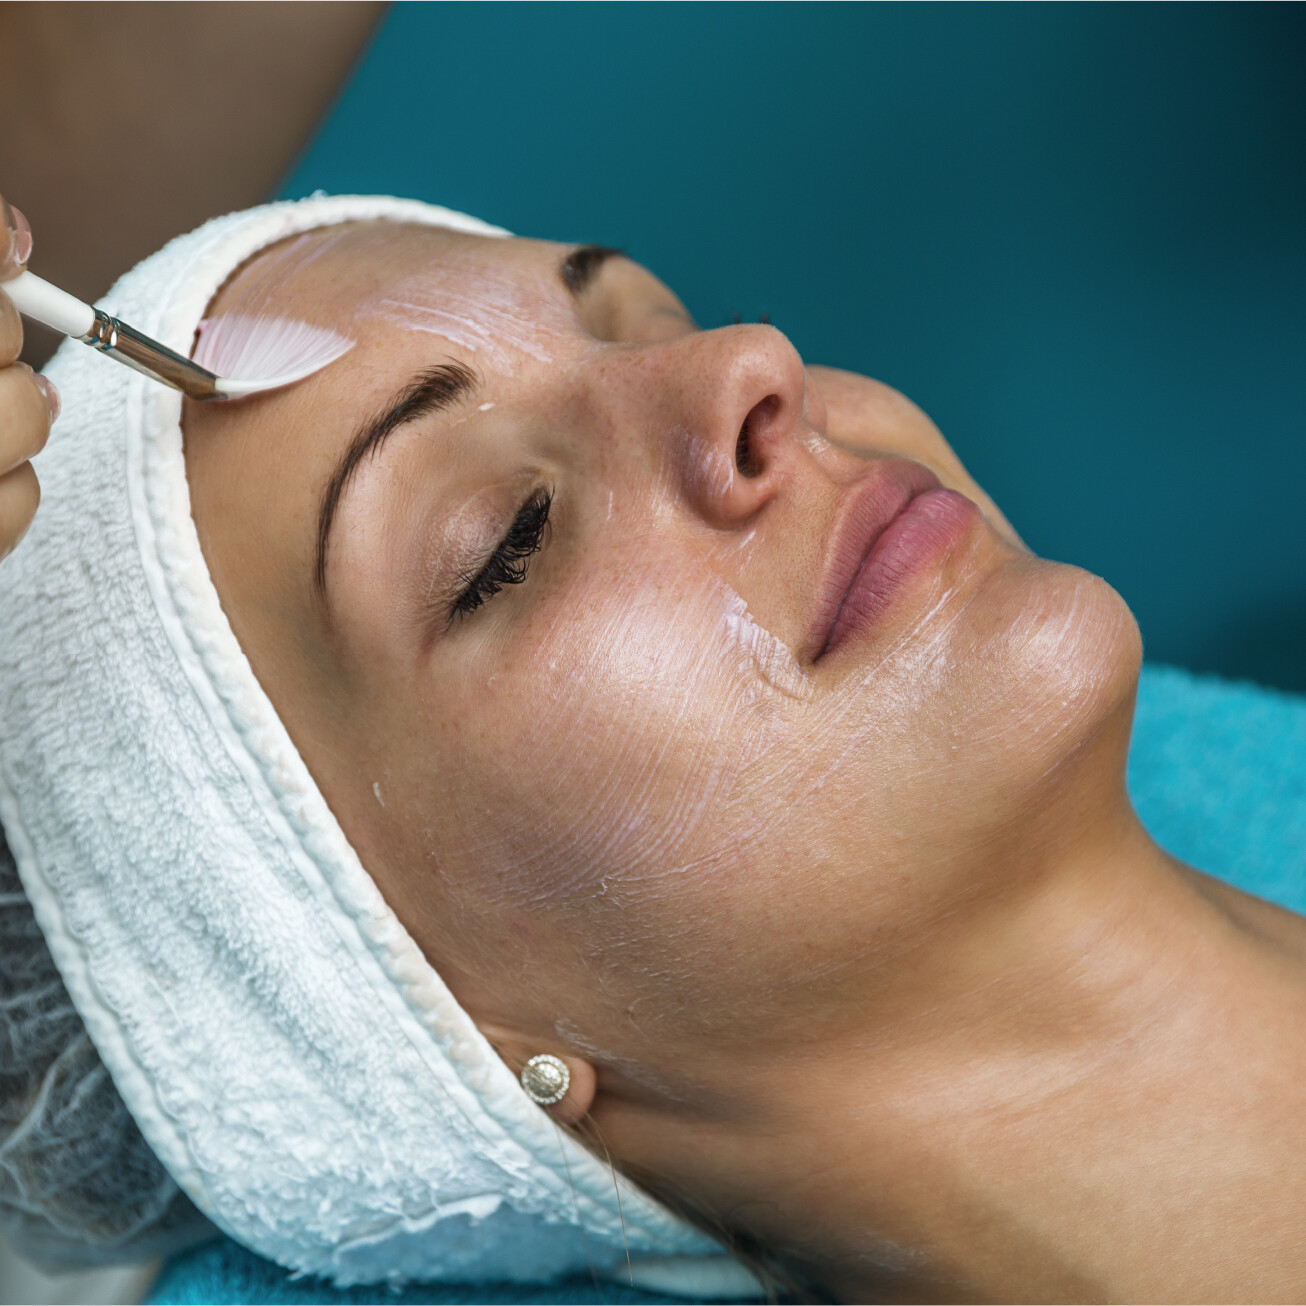 A provider uses a brush to gently apply a chemical peel to a patient's face